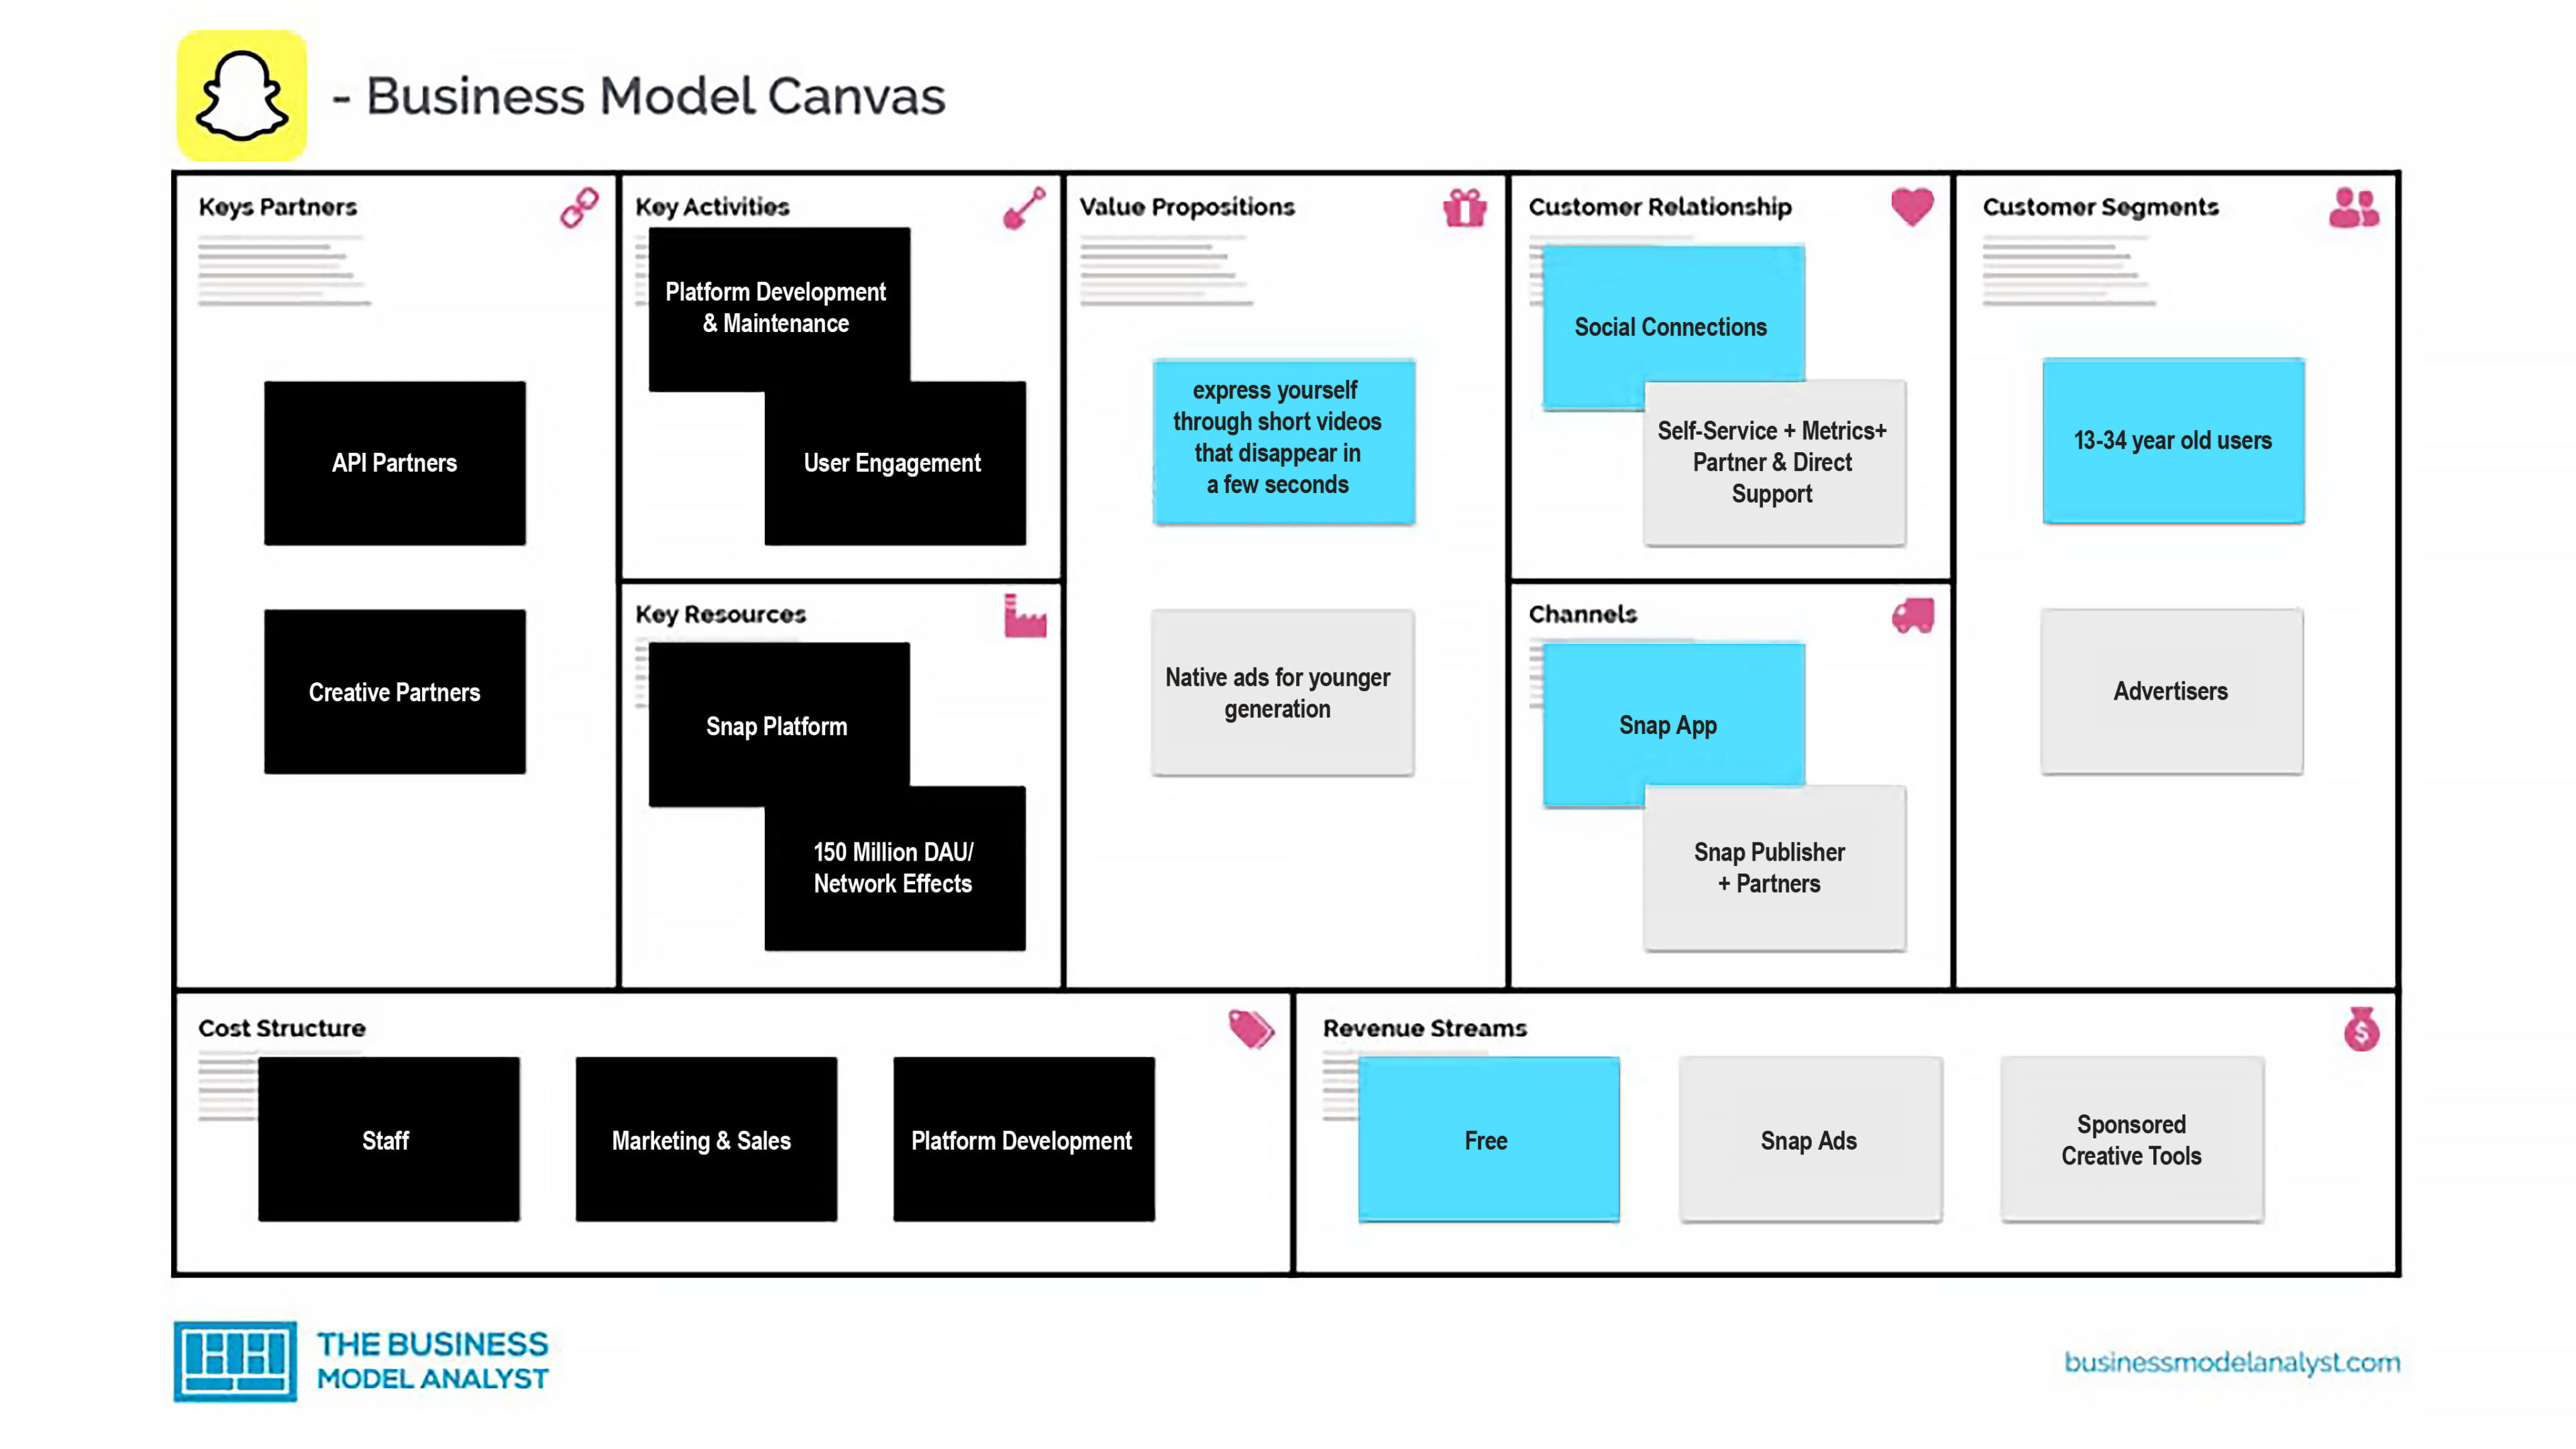 Snapchat-Business-Model-Canvas